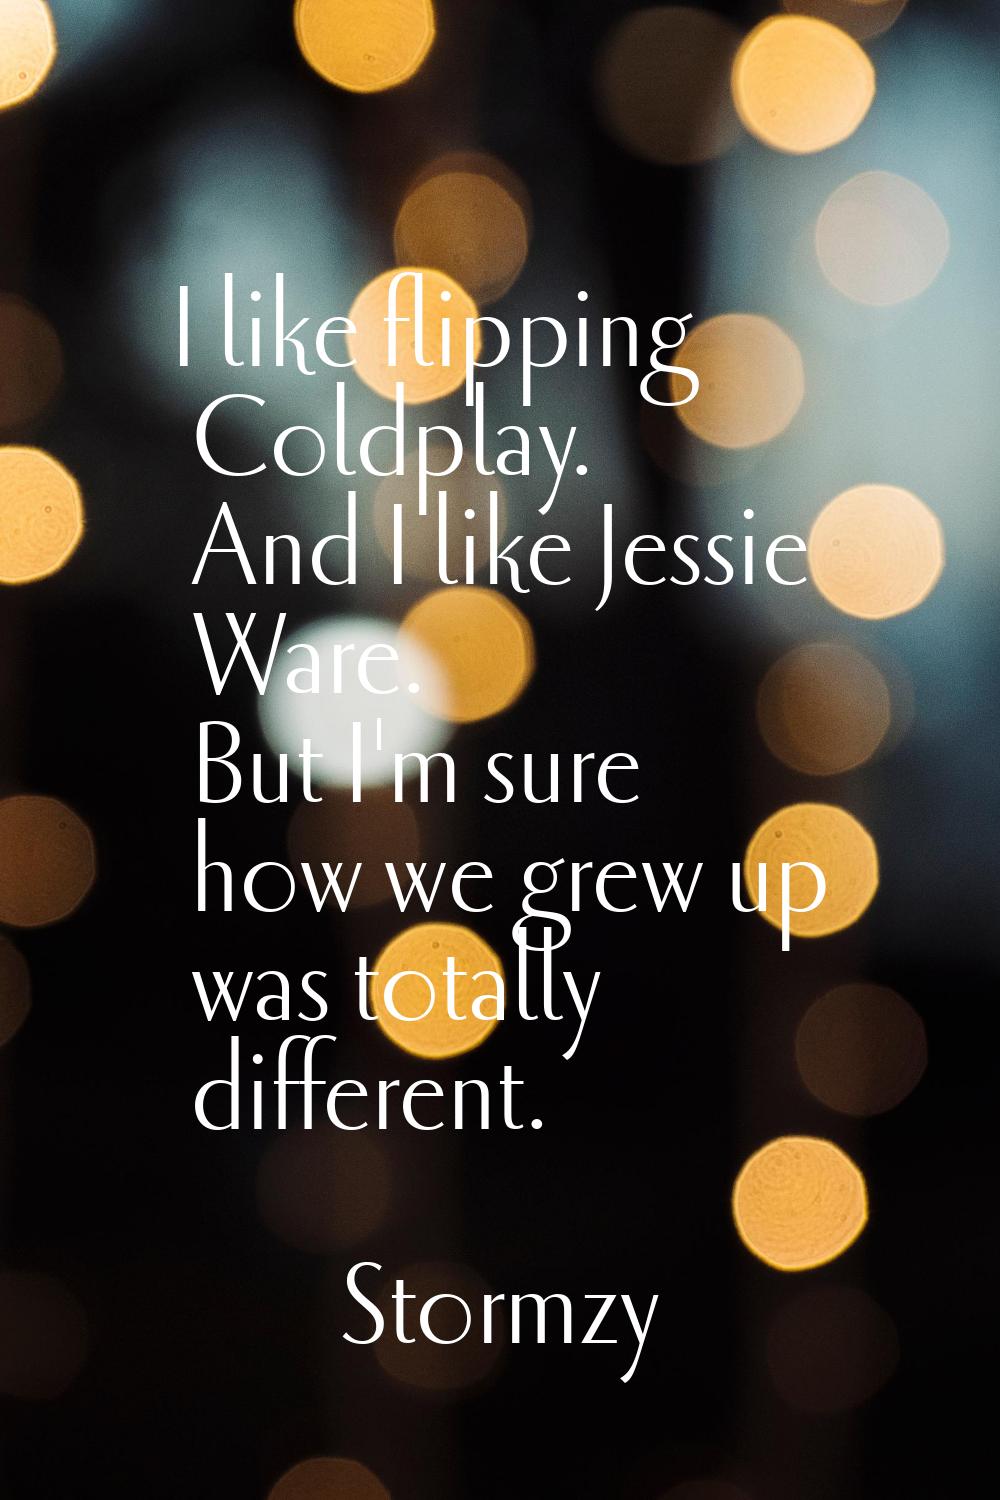 I like flipping Coldplay. And I like Jessie Ware. But I'm sure how we grew up was totally different